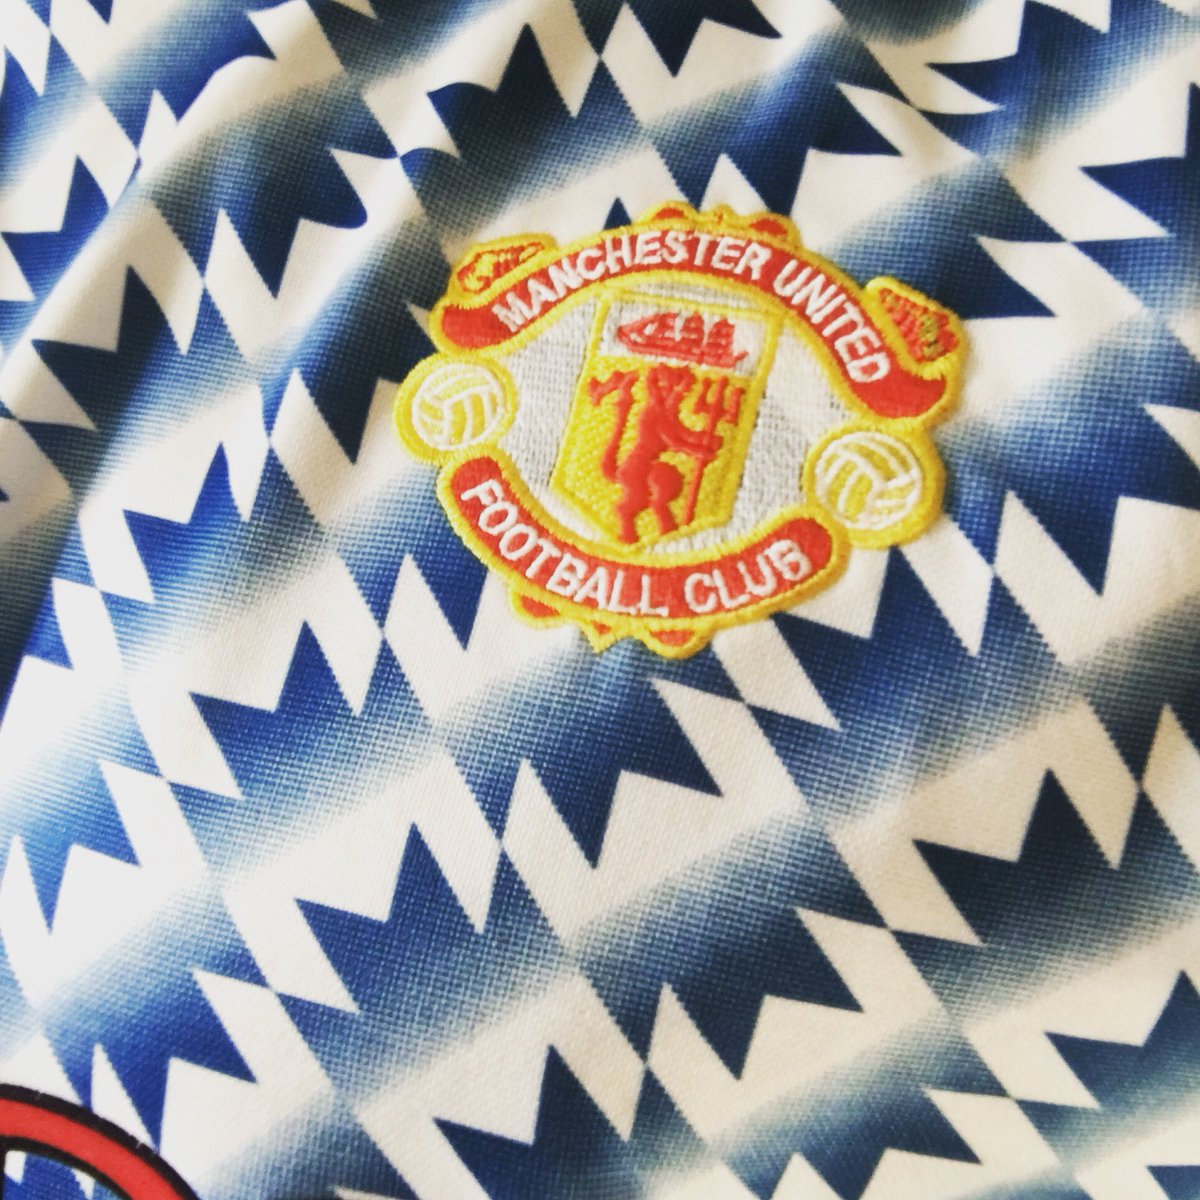 Put on a little classic shall we #mufc#bestkit